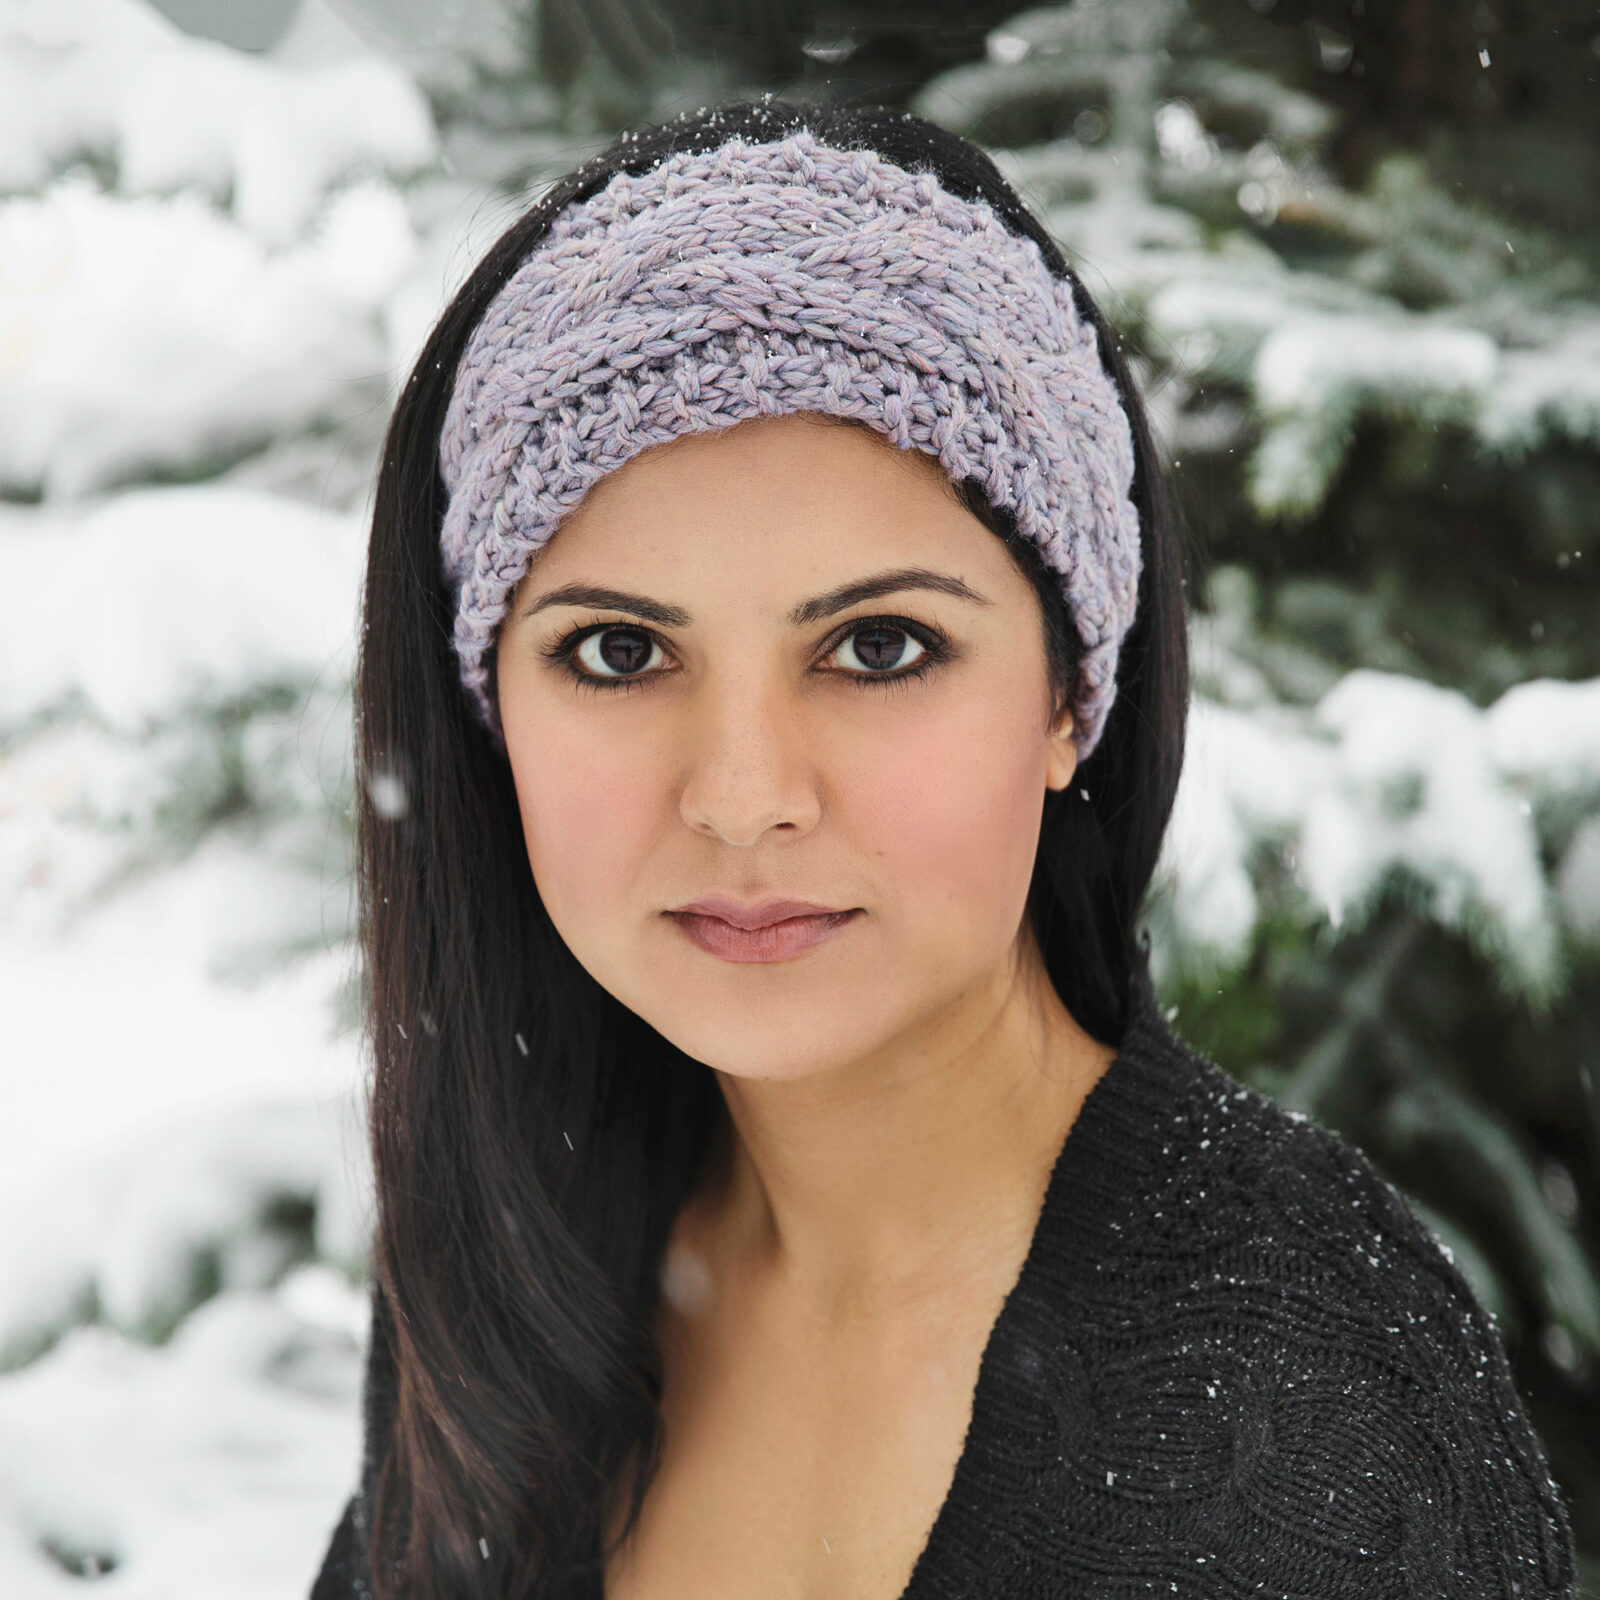 Chunky Cable Knit Headband Pattern - Leelee Knits